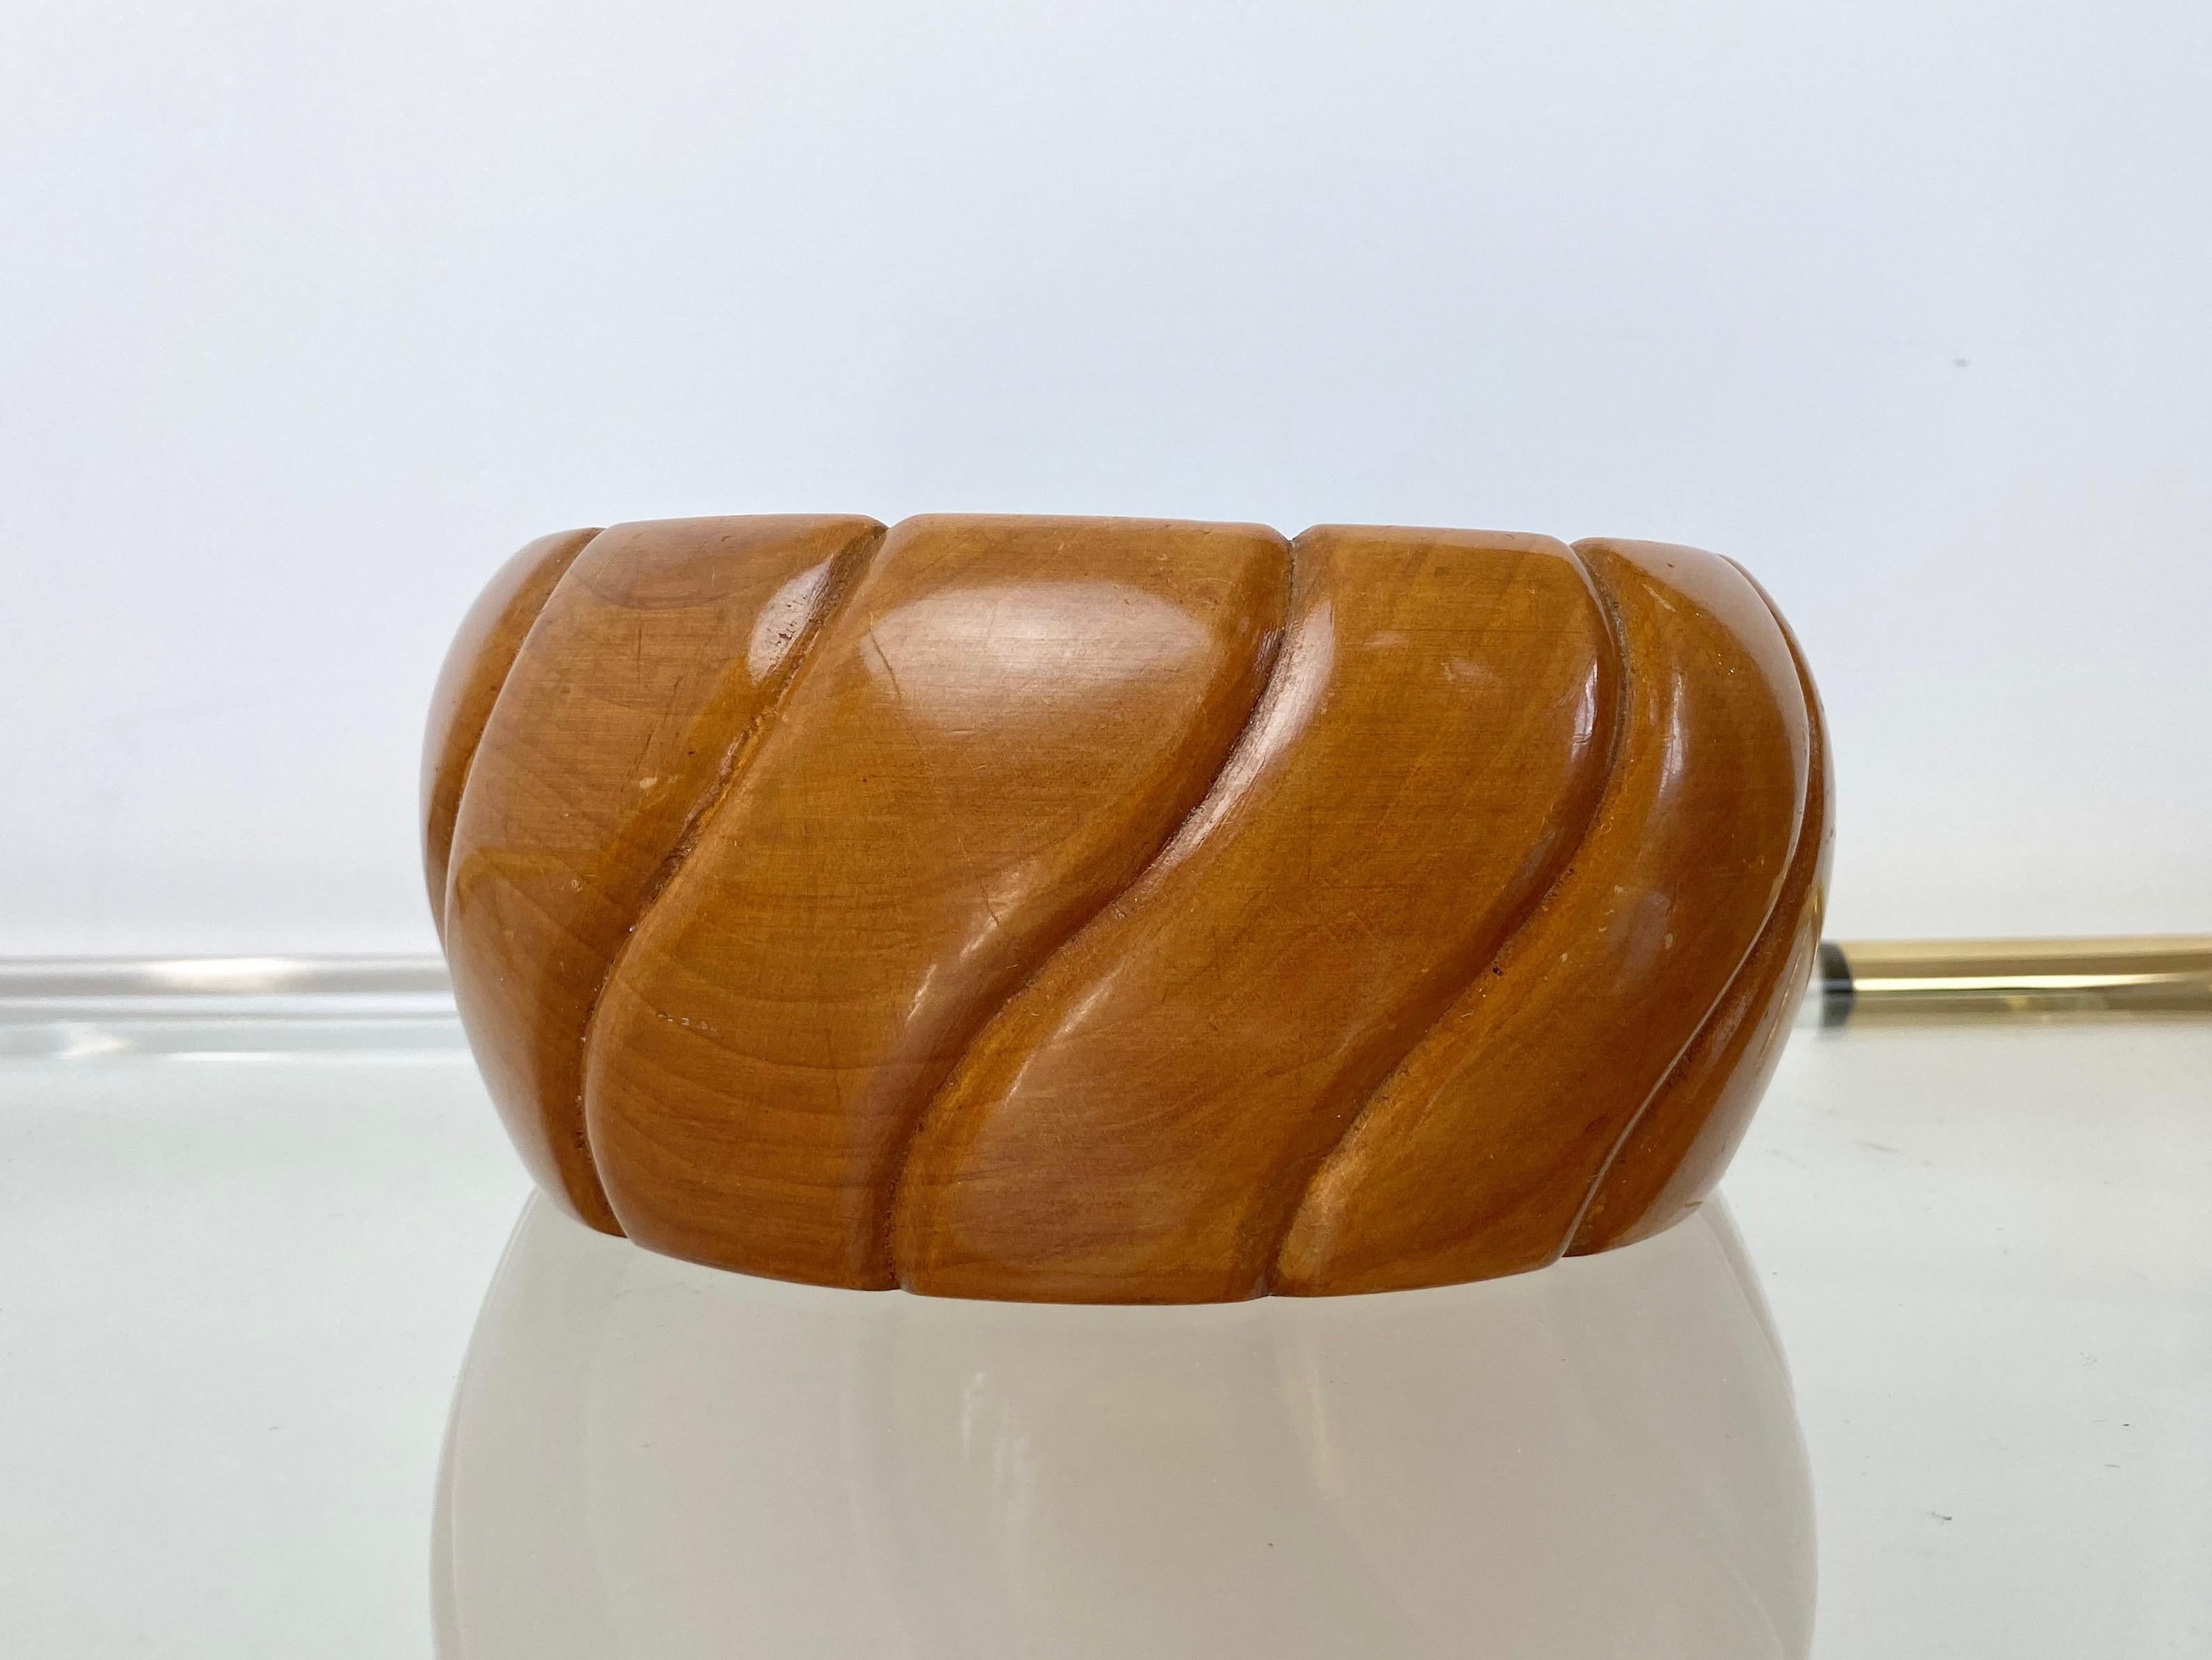 Wood Box Bowl by Aldo Tura for Macabo Italy 1950s Art Deco For Sale 2